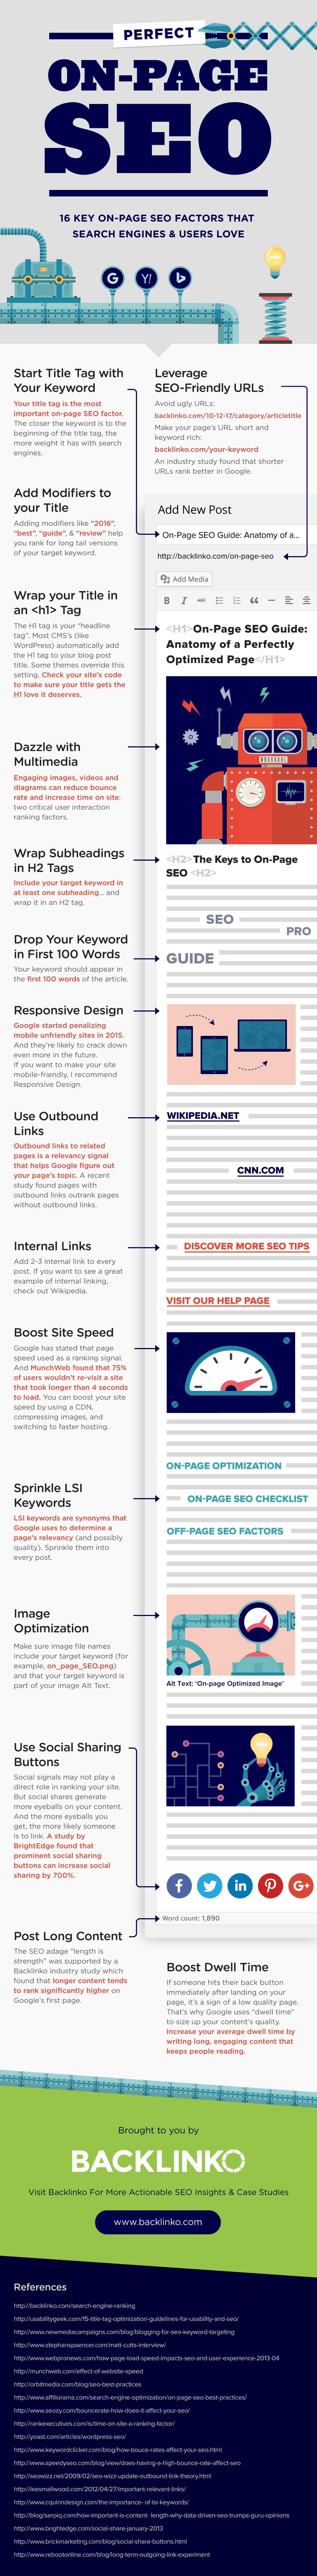 One Page SEO